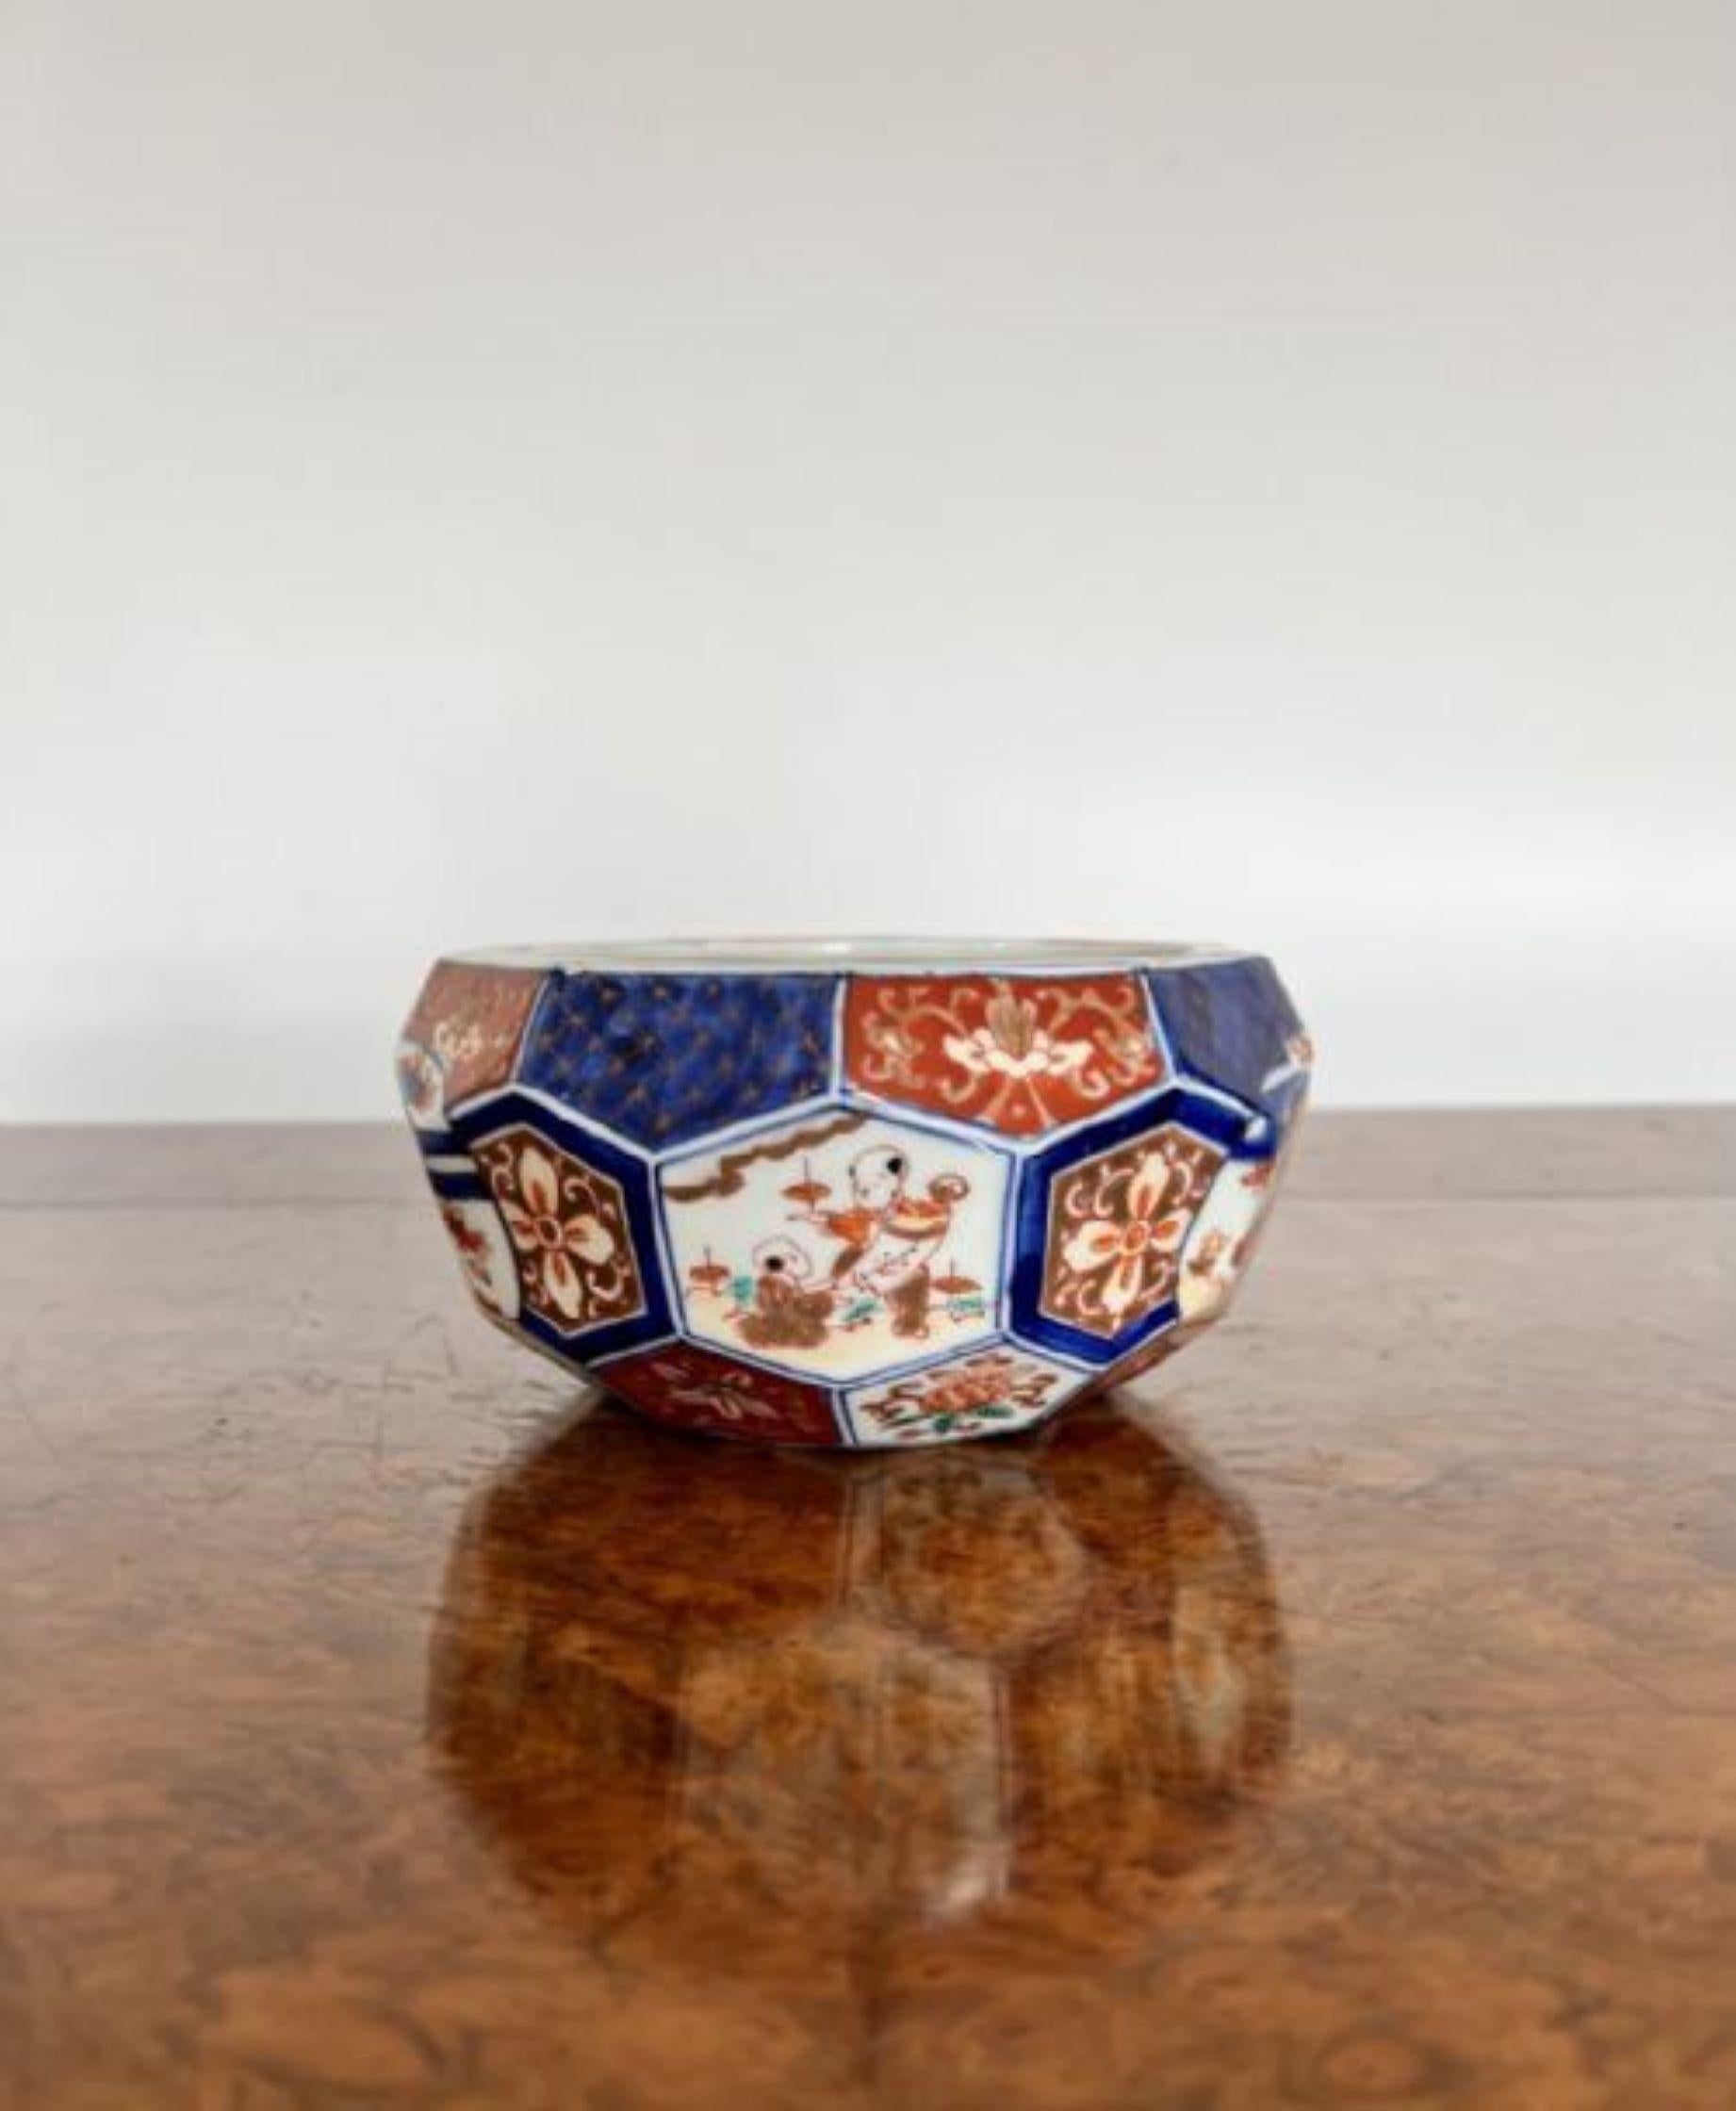 Stunning quality unusual hexagonal shaped antique Japanese imari bowl having an unusual hexagonal shaped imari bowl in red, blue white and gold colours, hand painted decorated panels with people, flowers, leaves and scrolls. Having wonderful